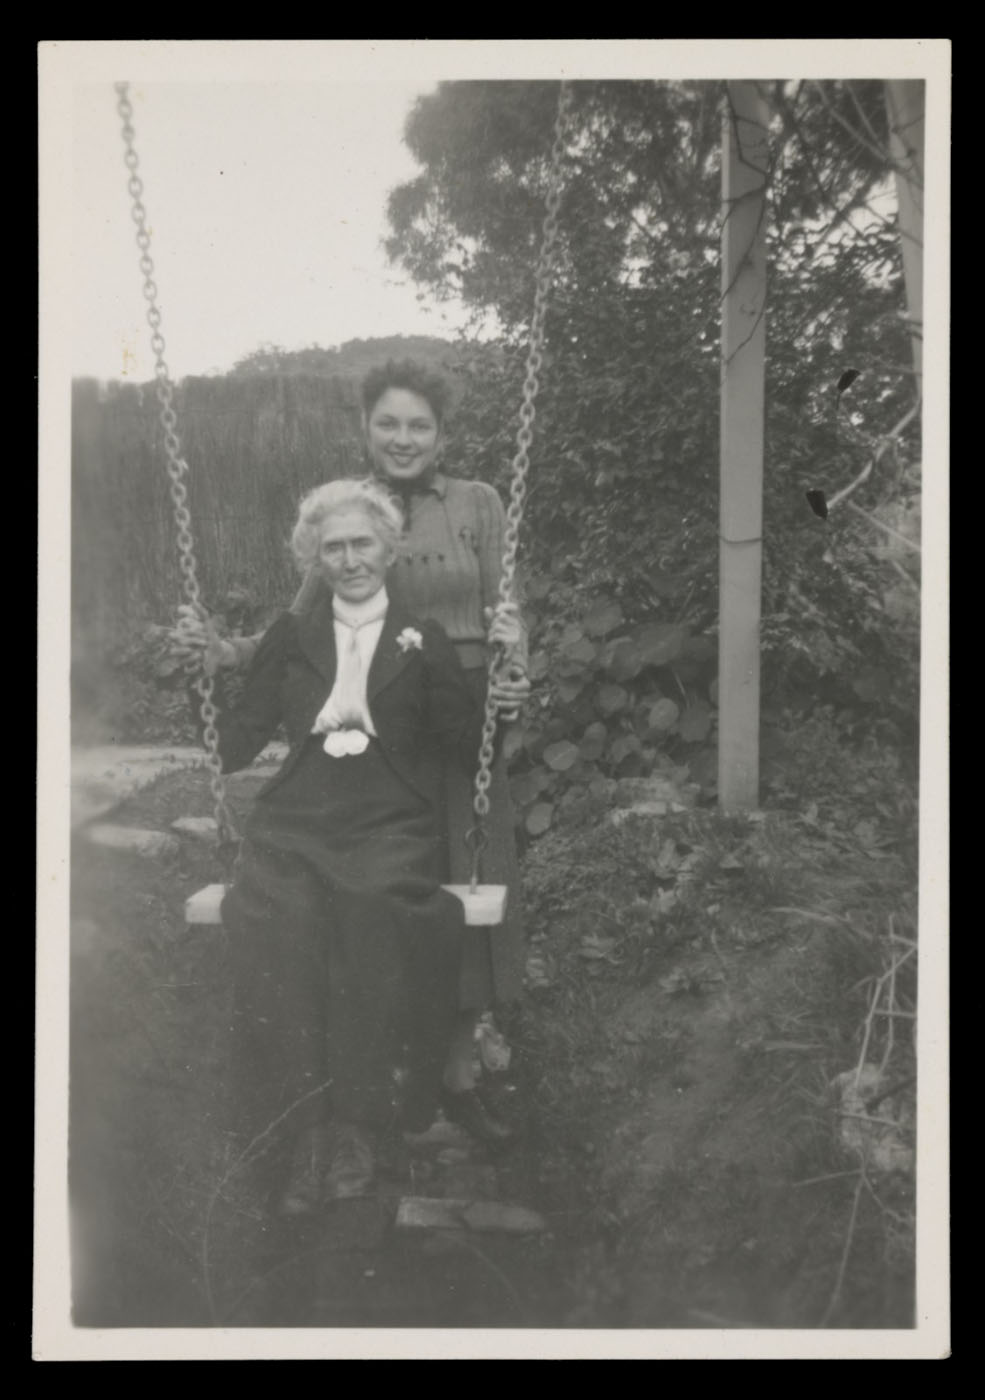 Black and white photograph showing an elderly woman sitting on a swing. A younger woman stands behind her, posing for the photograph. - click to view larger image